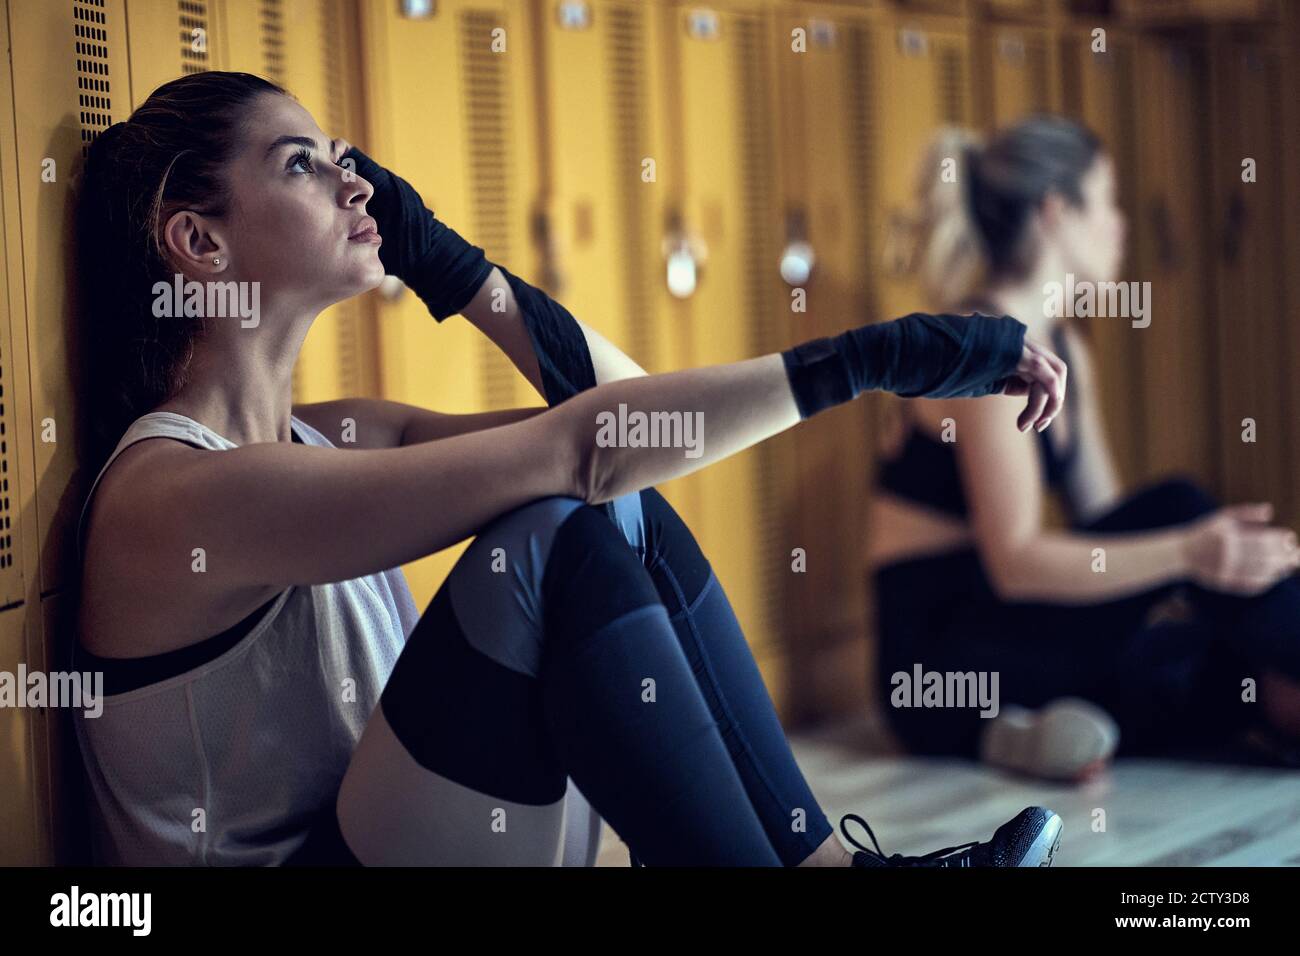 Young girl chilling in a locker room after strenuous training Stock Photo